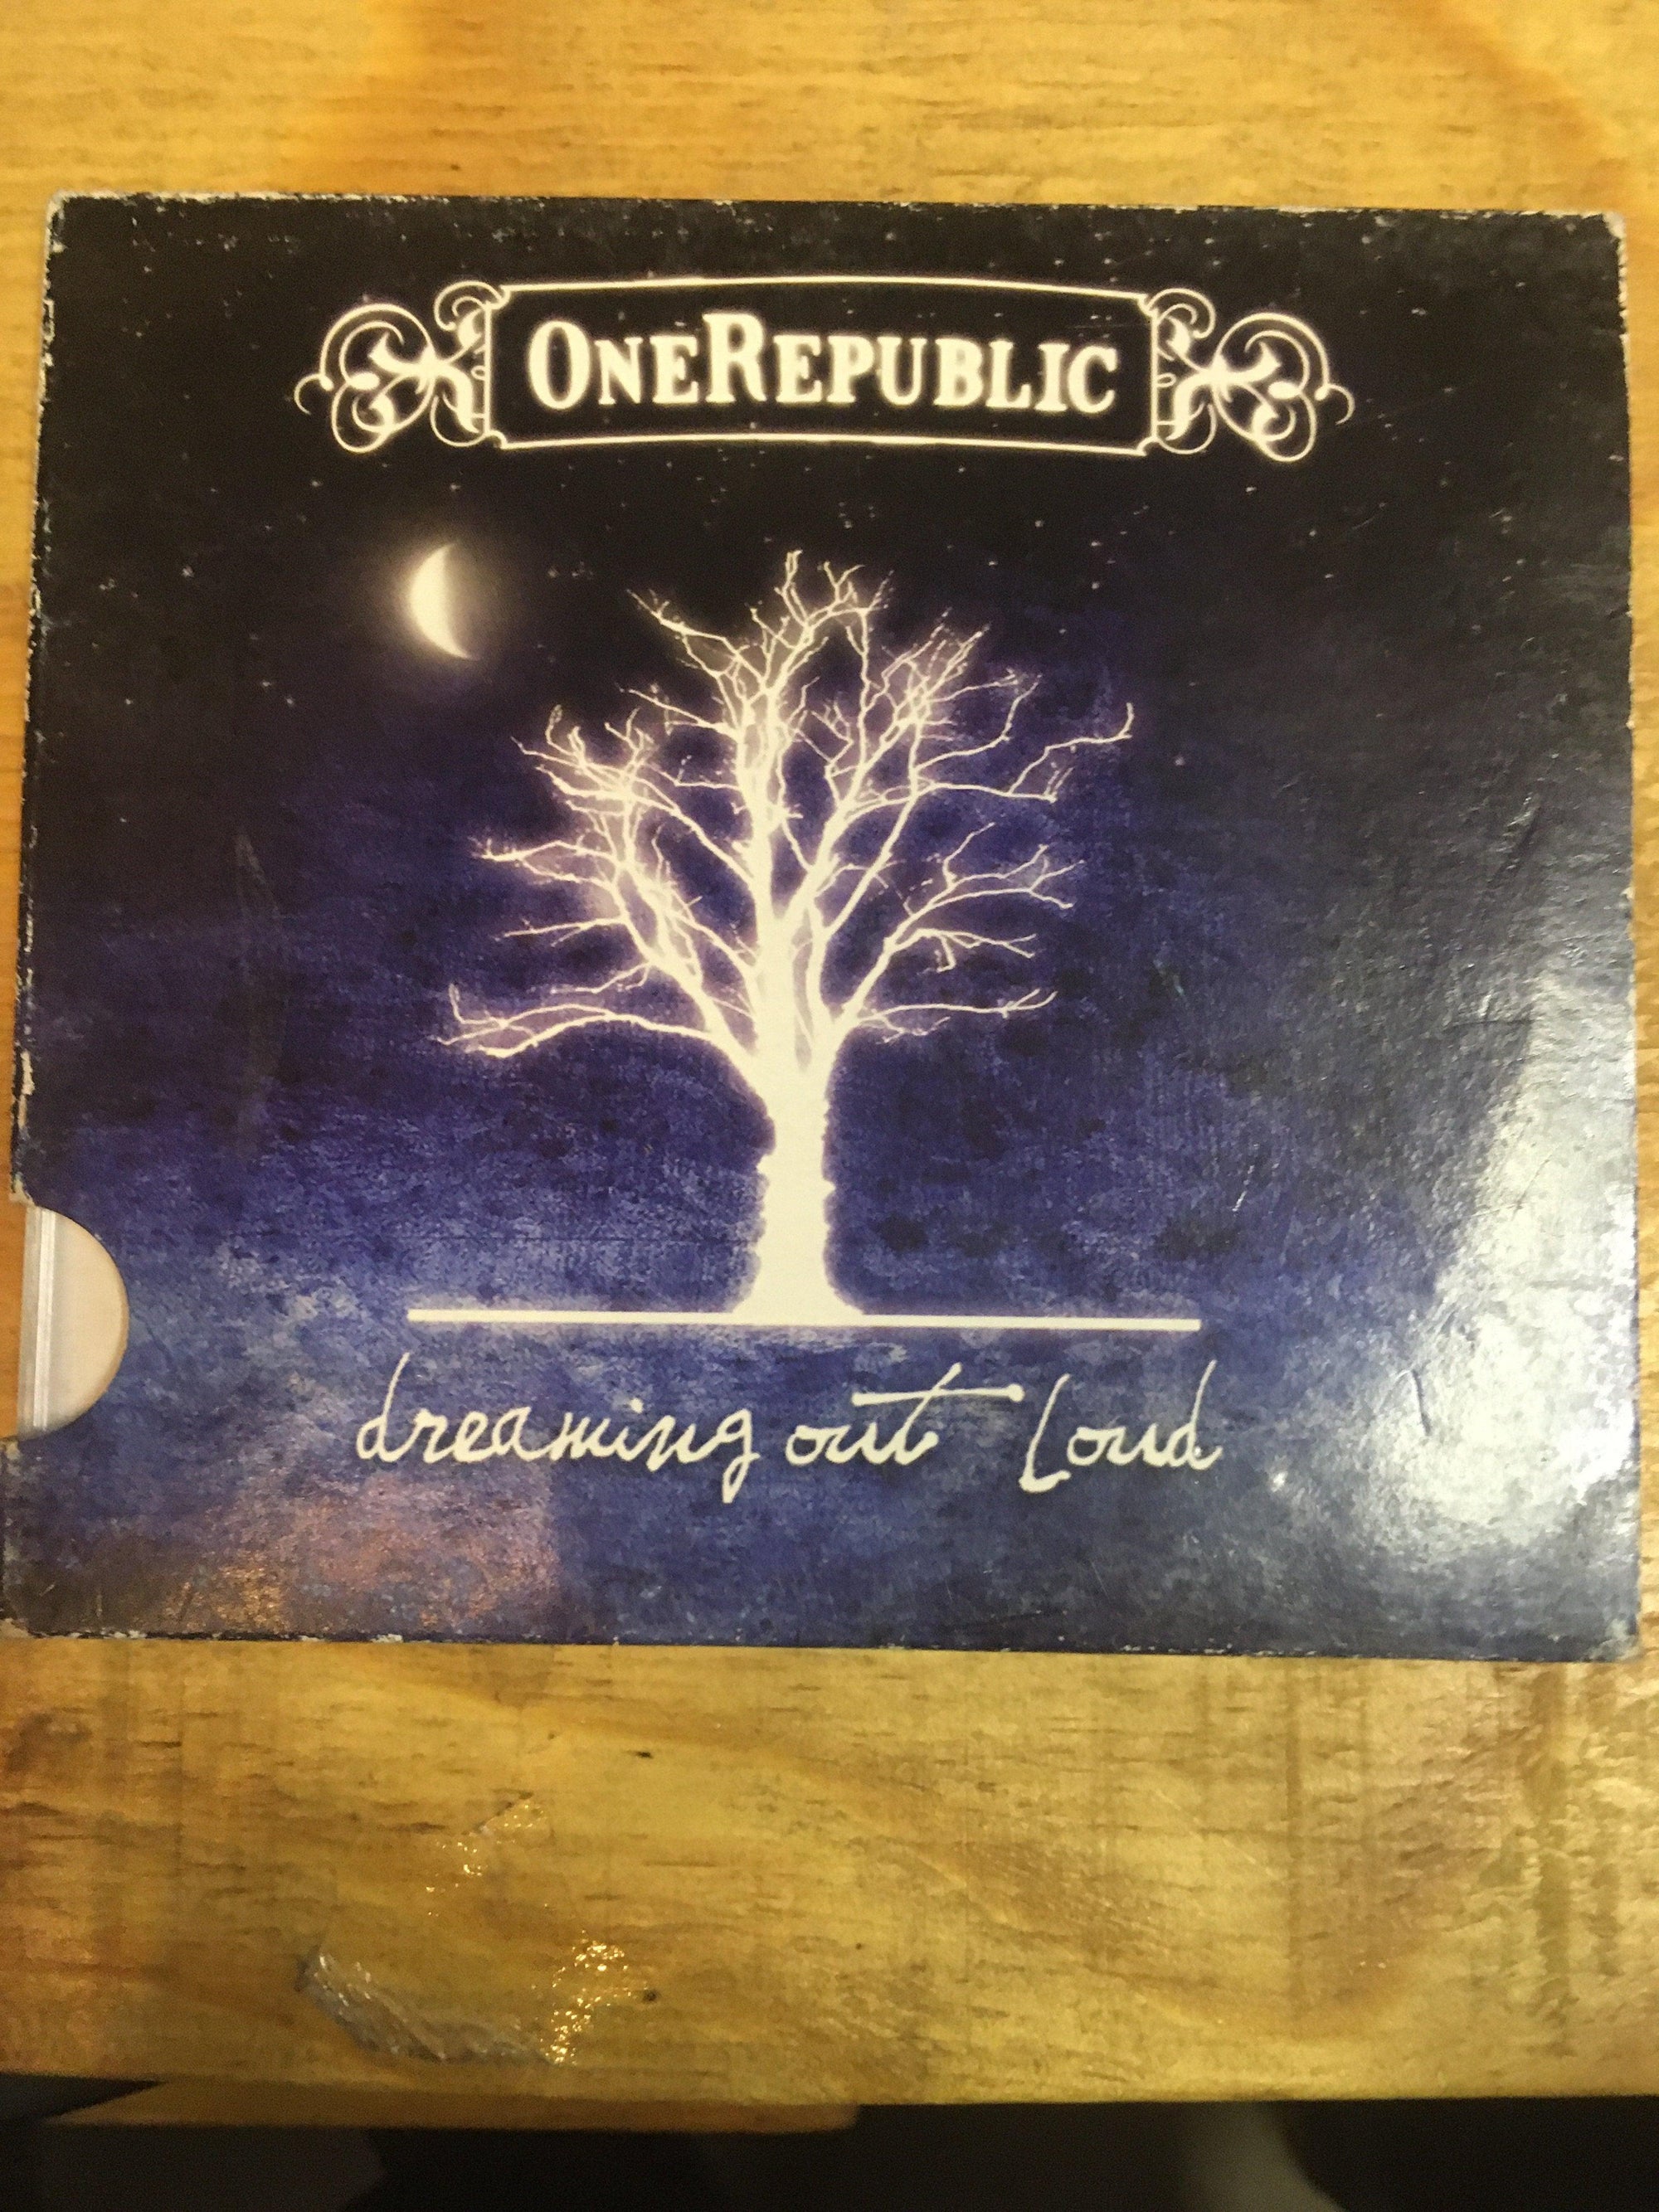 One Republic: Dreaming out Loud - CD - 2ndhandwarehouse.com